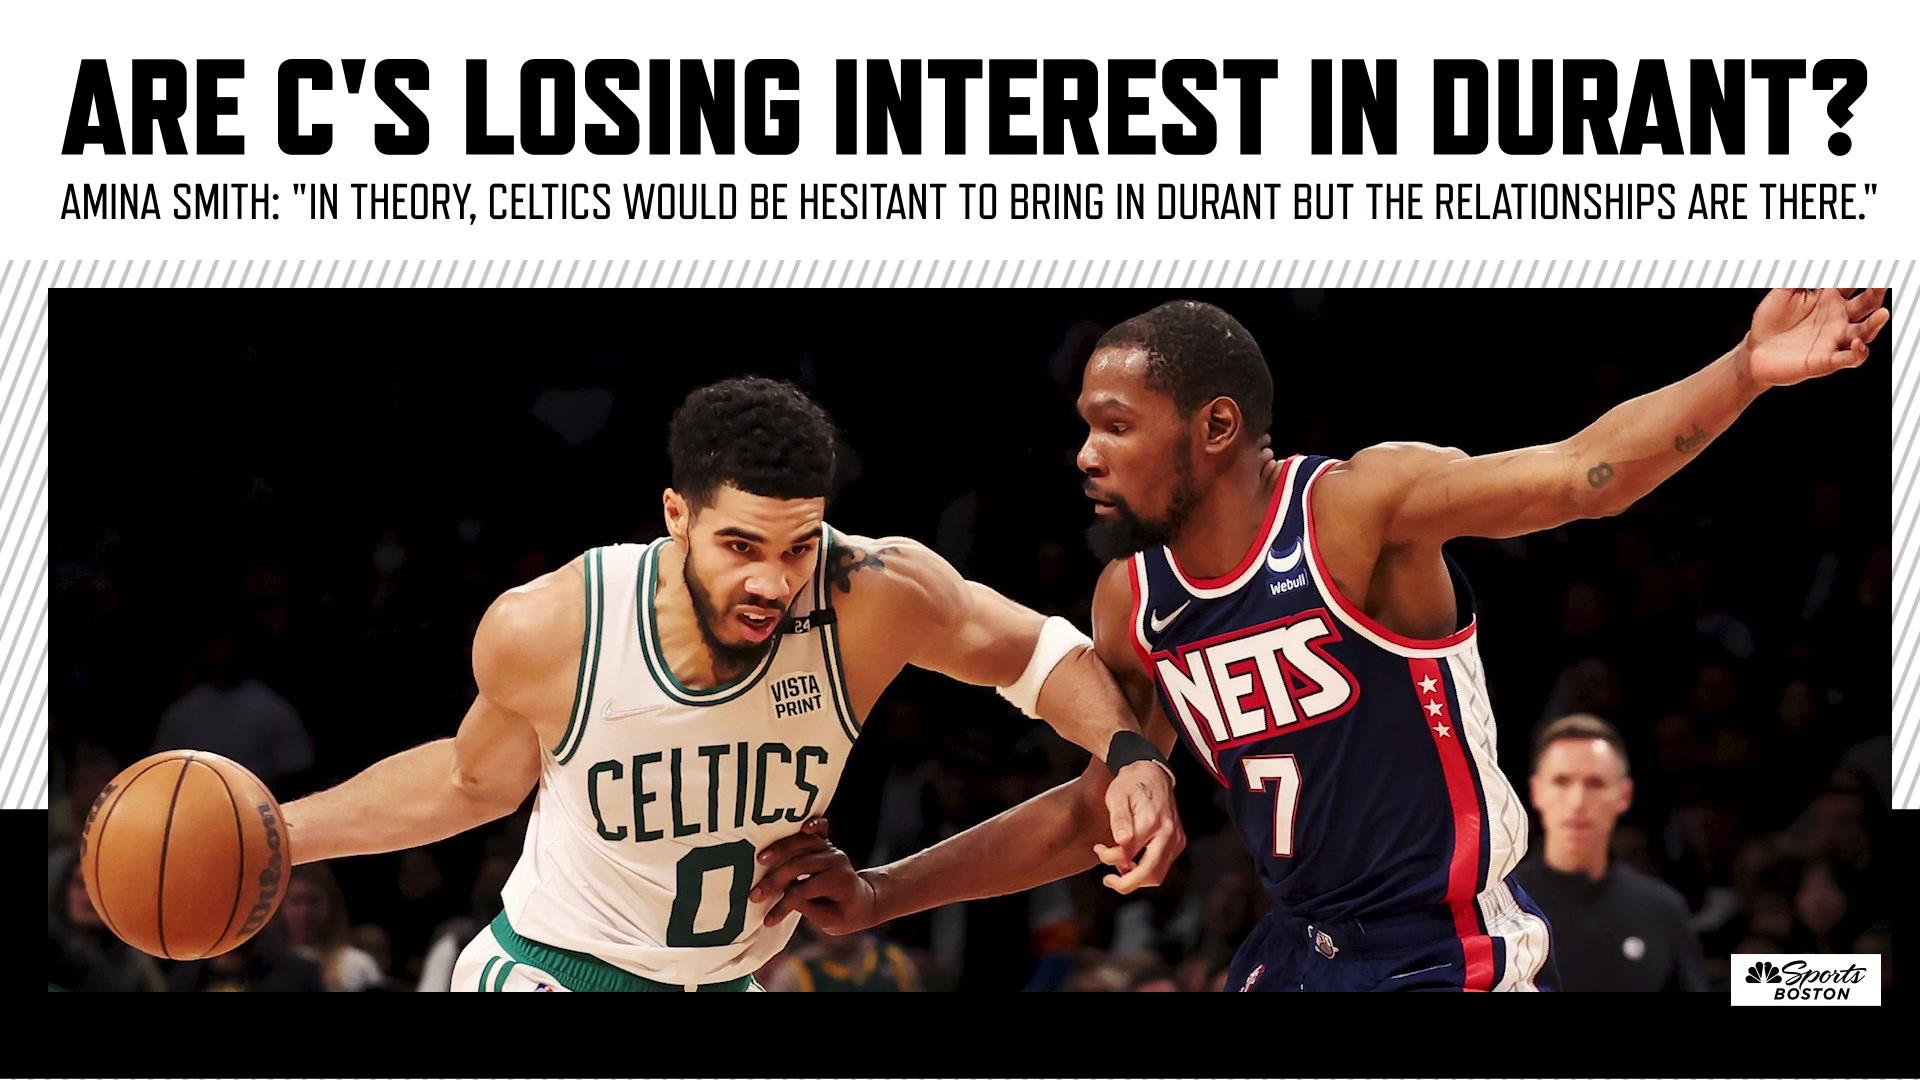 The Boston Celtics are going to be tough! - Basketball Forever